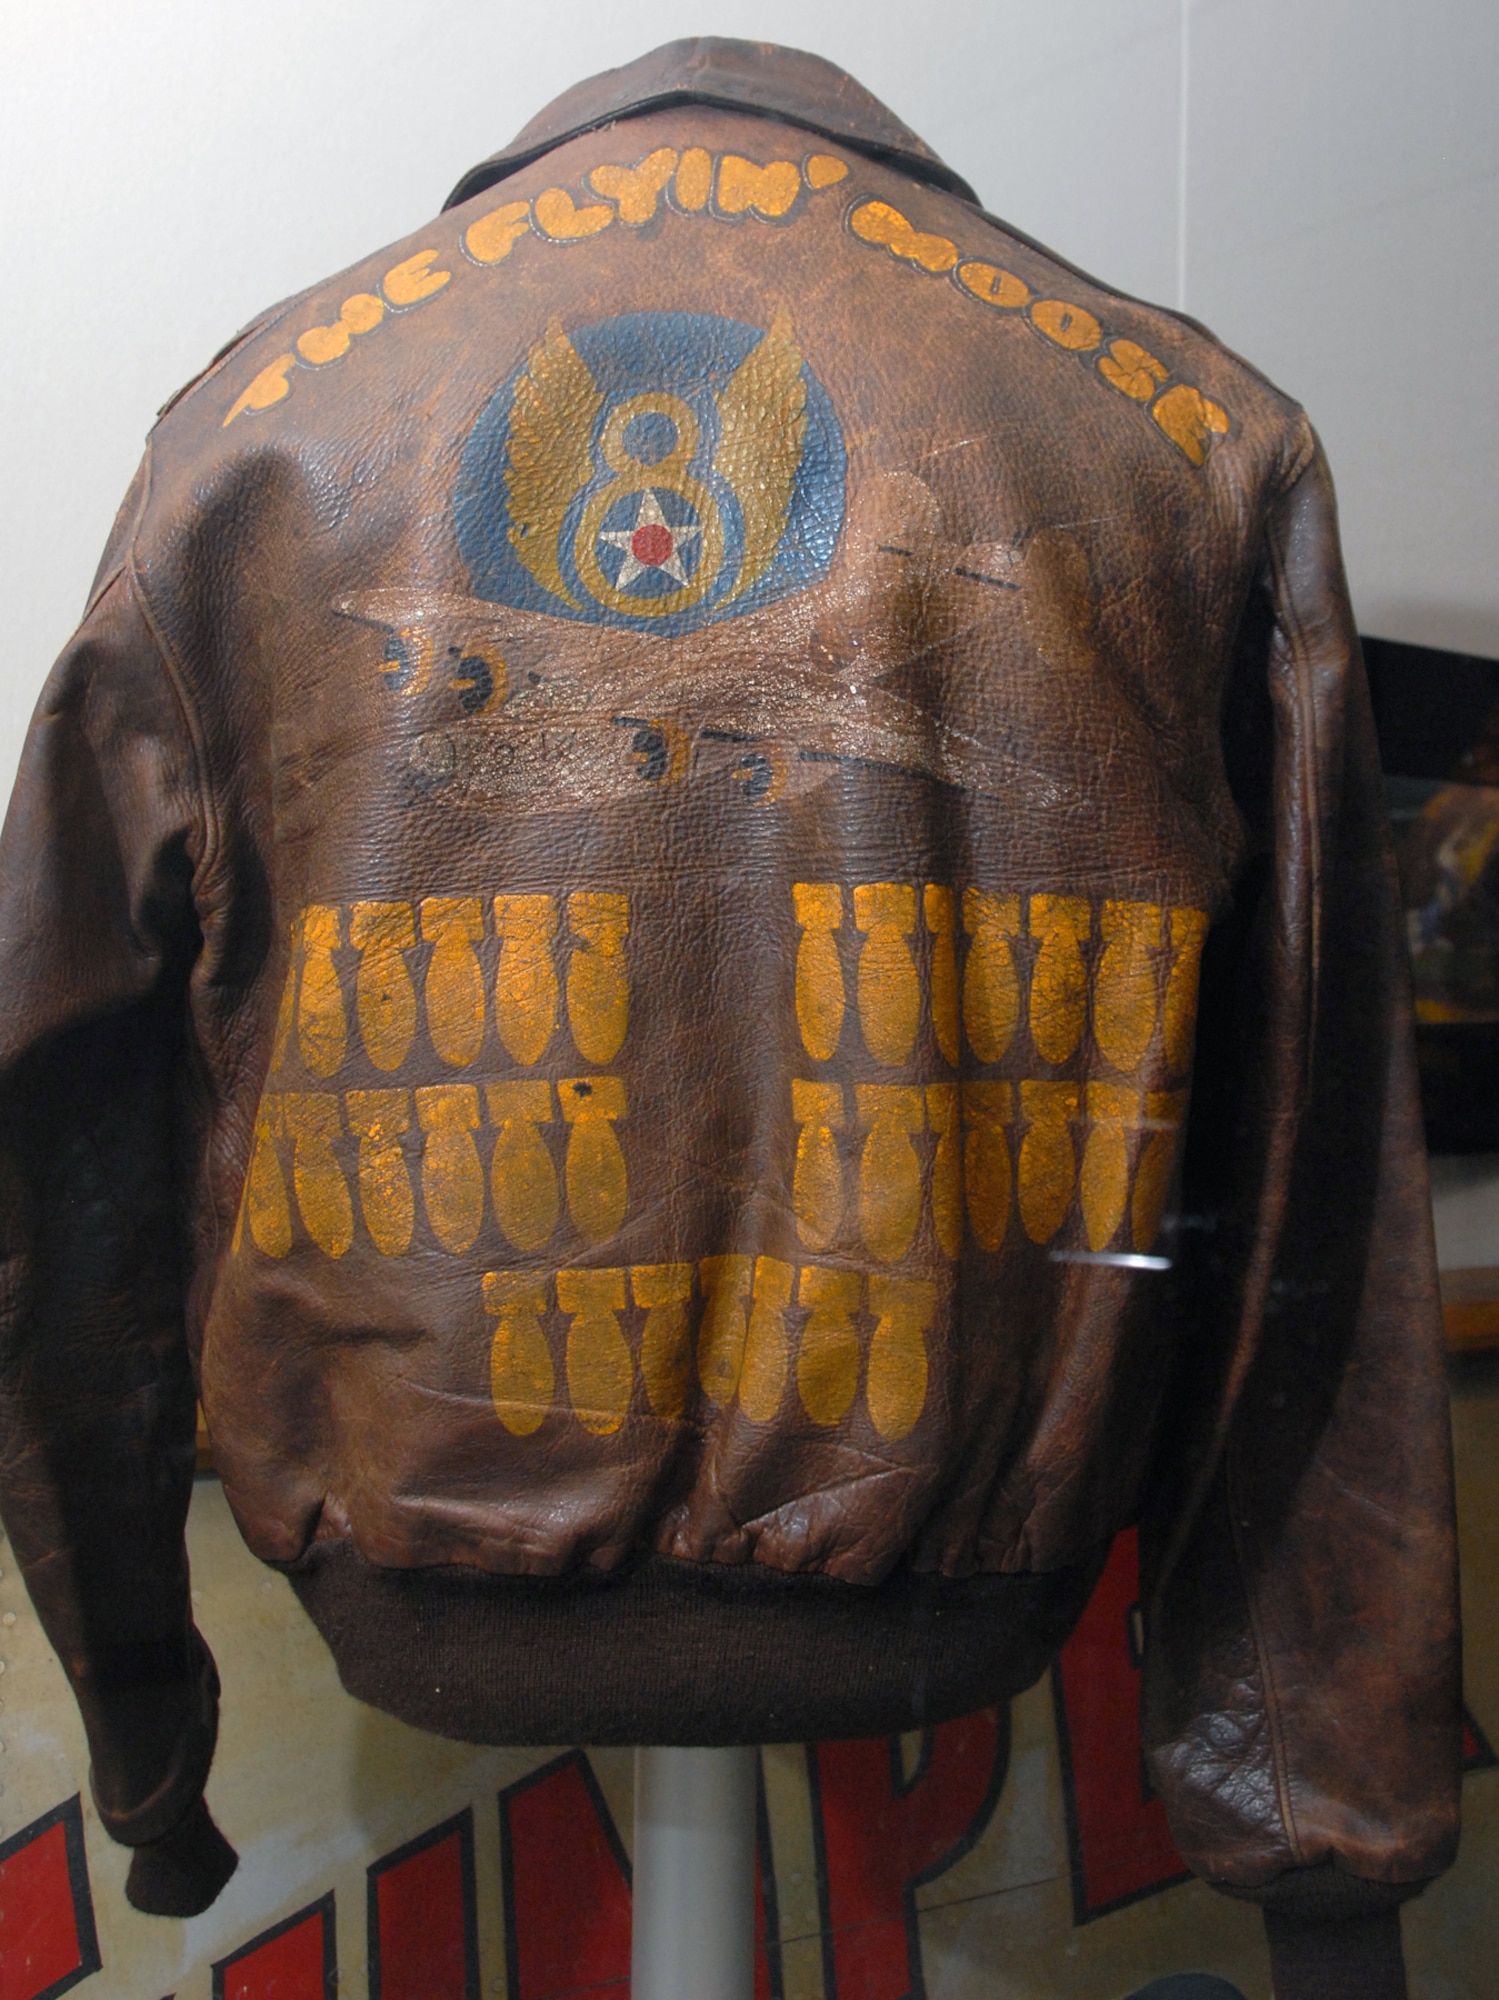 DAYTON, Ohio -- "The Flyin' Moose" aviator jacket on display at the National Museum of the United States Air Force. (U.S. Air Force photo)